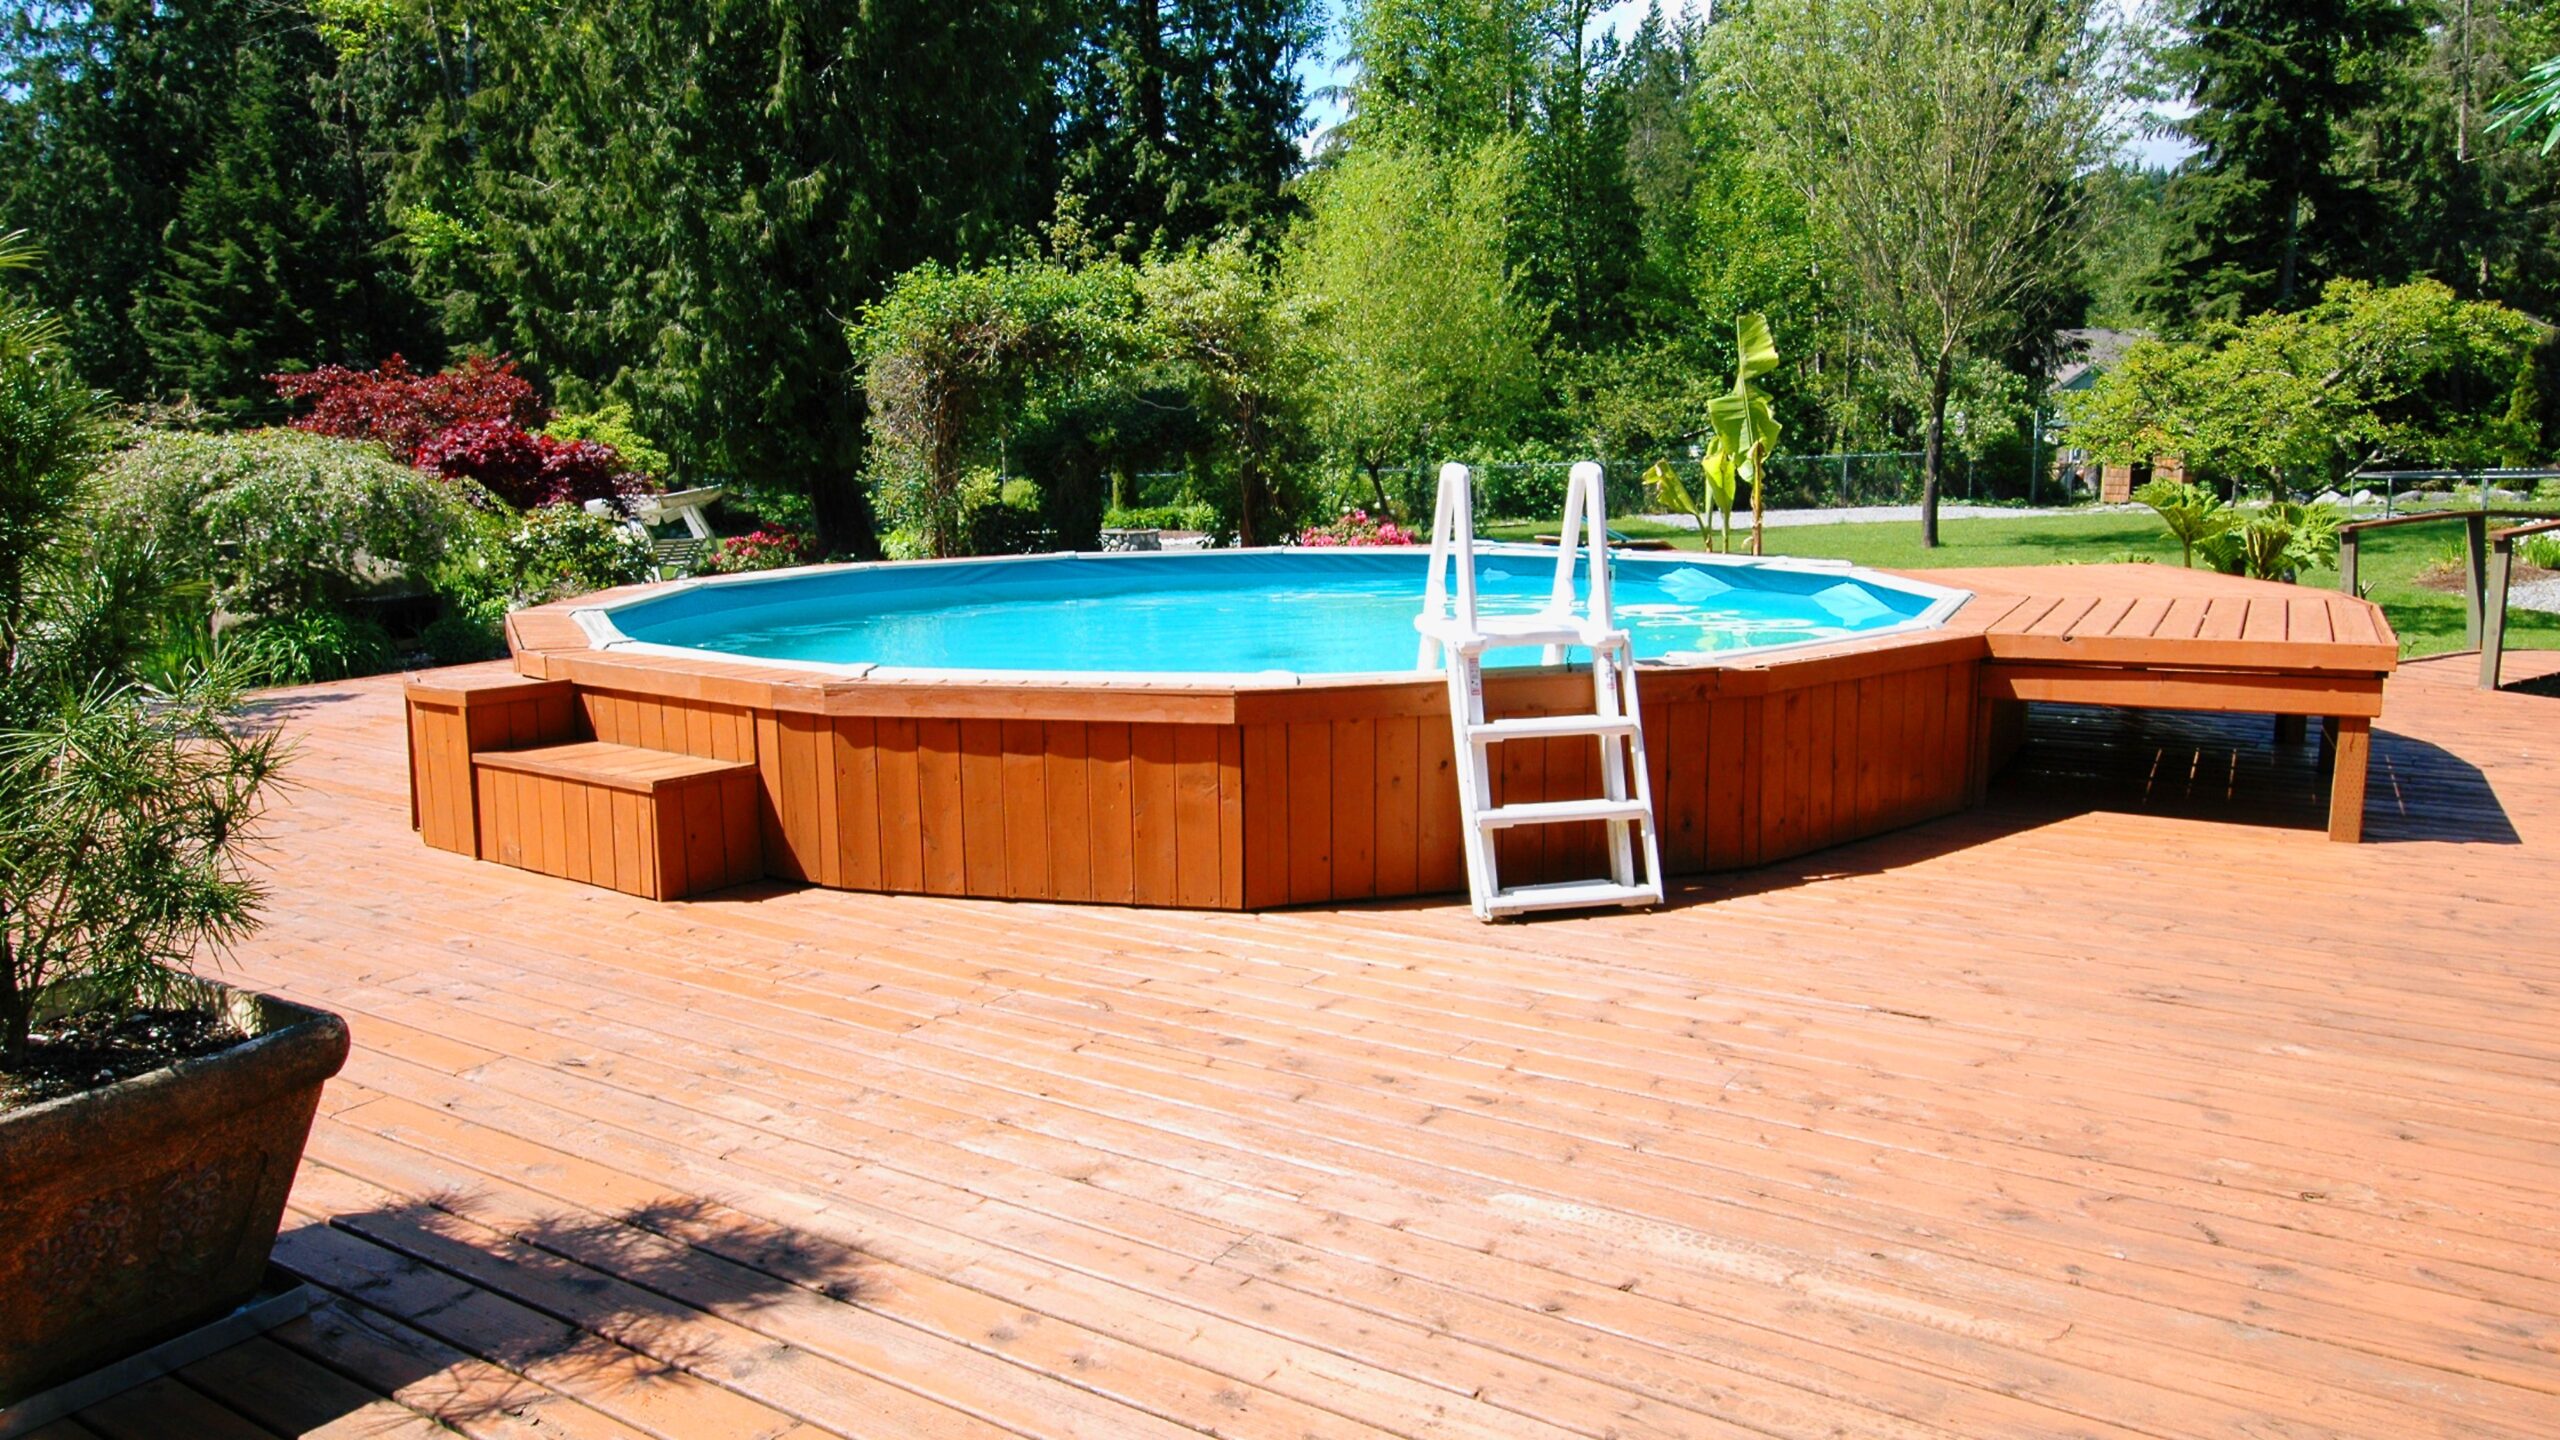 5 Things to Considеr Whеn Choosing Swimming Pool Suppliеs